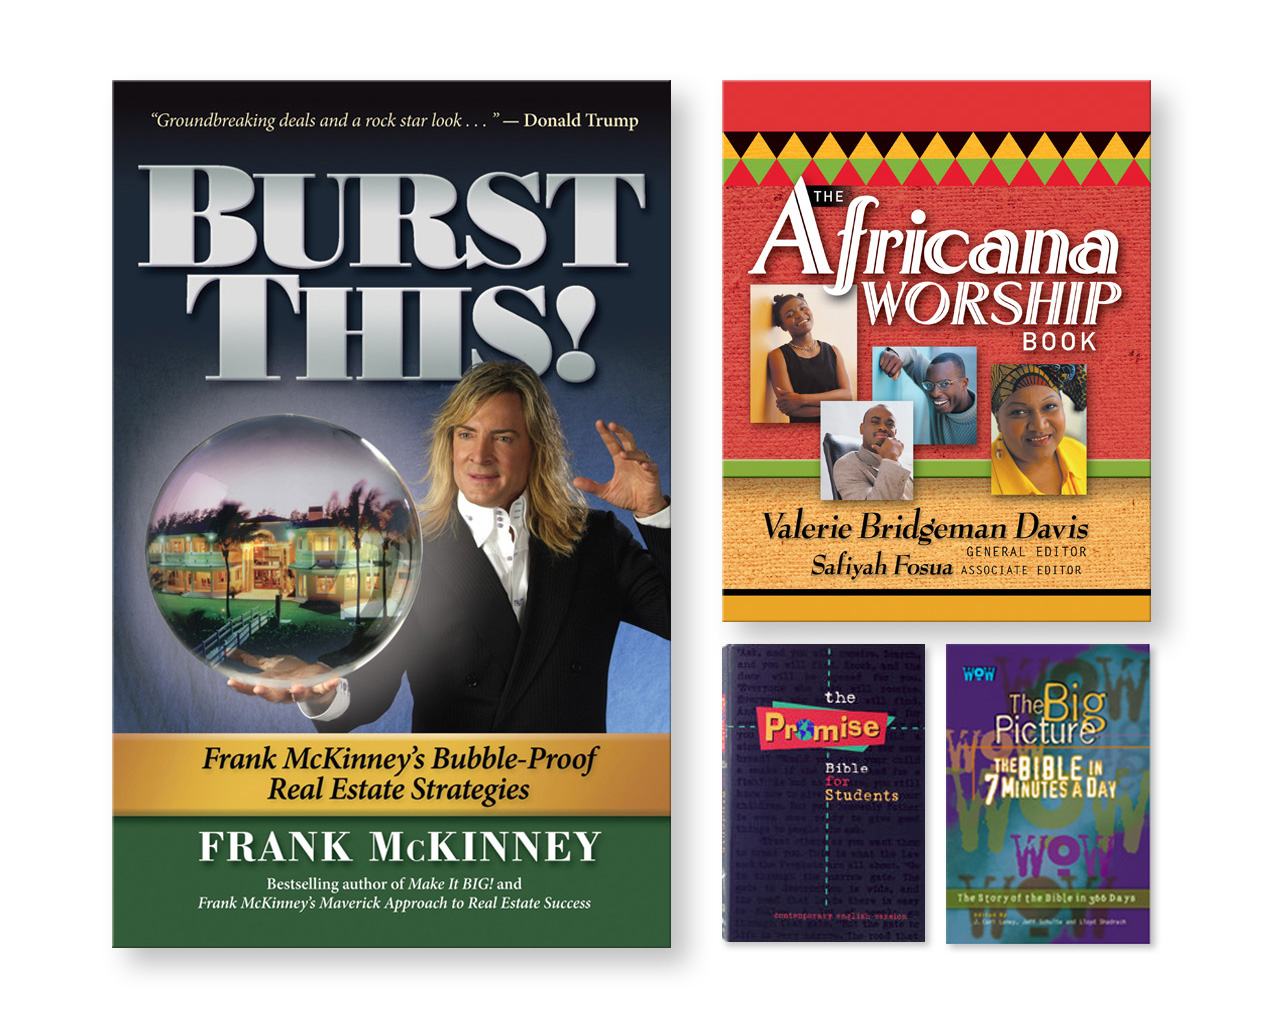 Burst This! by Frank McKinney and religious book and bible designs